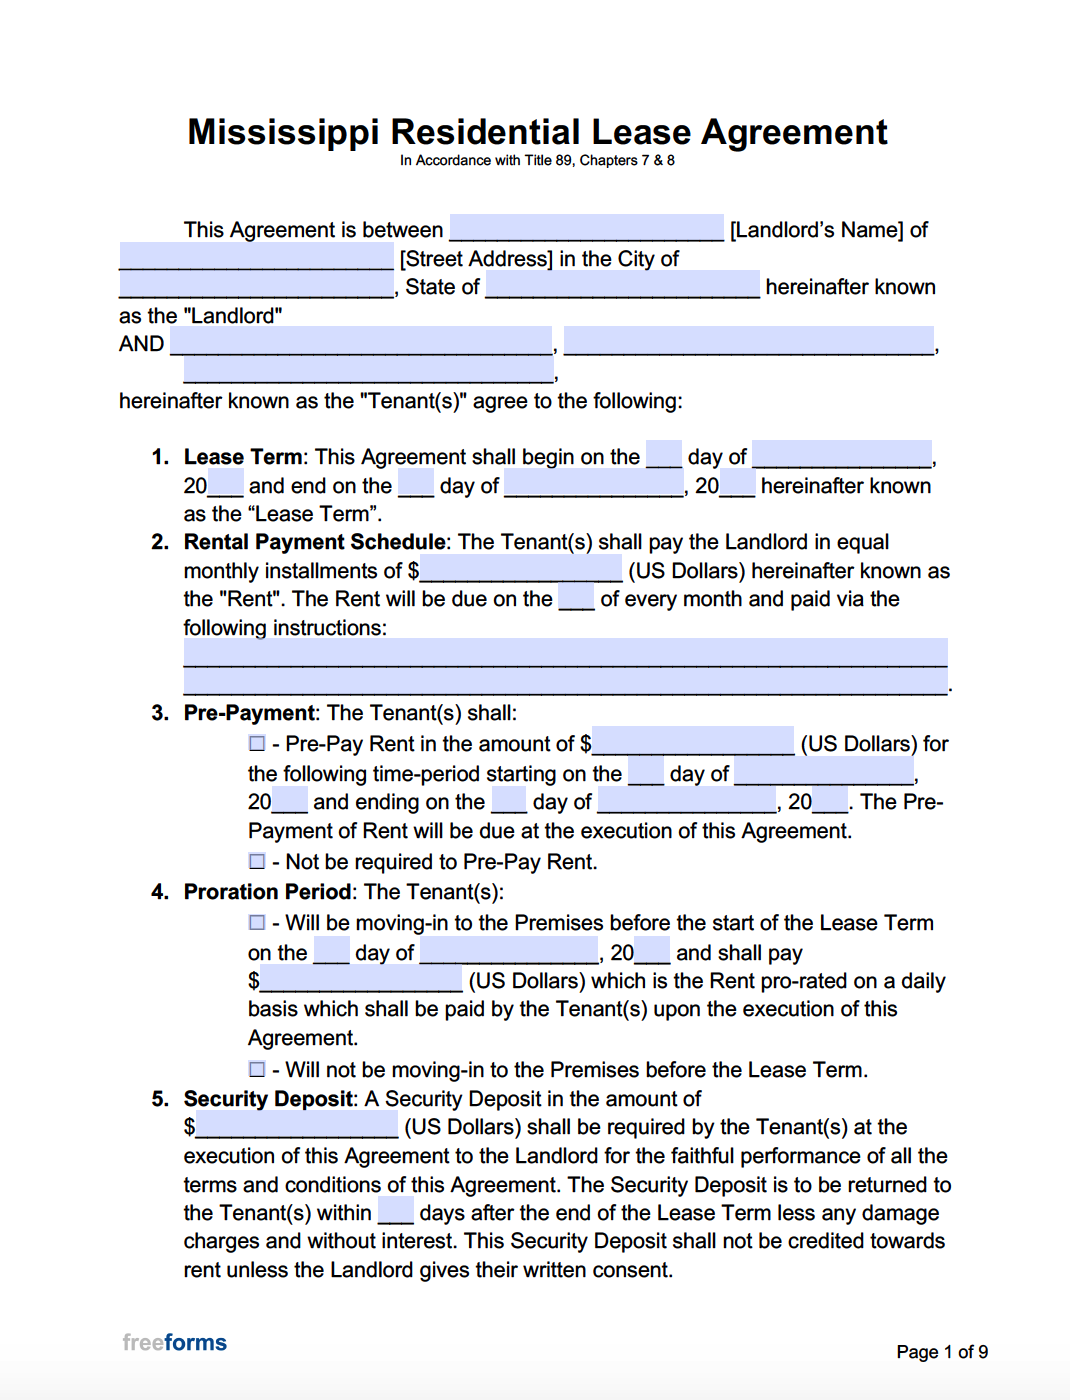 Free Mississippi Rental Lease Agreement Templates | Pdf | Word throughout Free Printable Lease Agreement